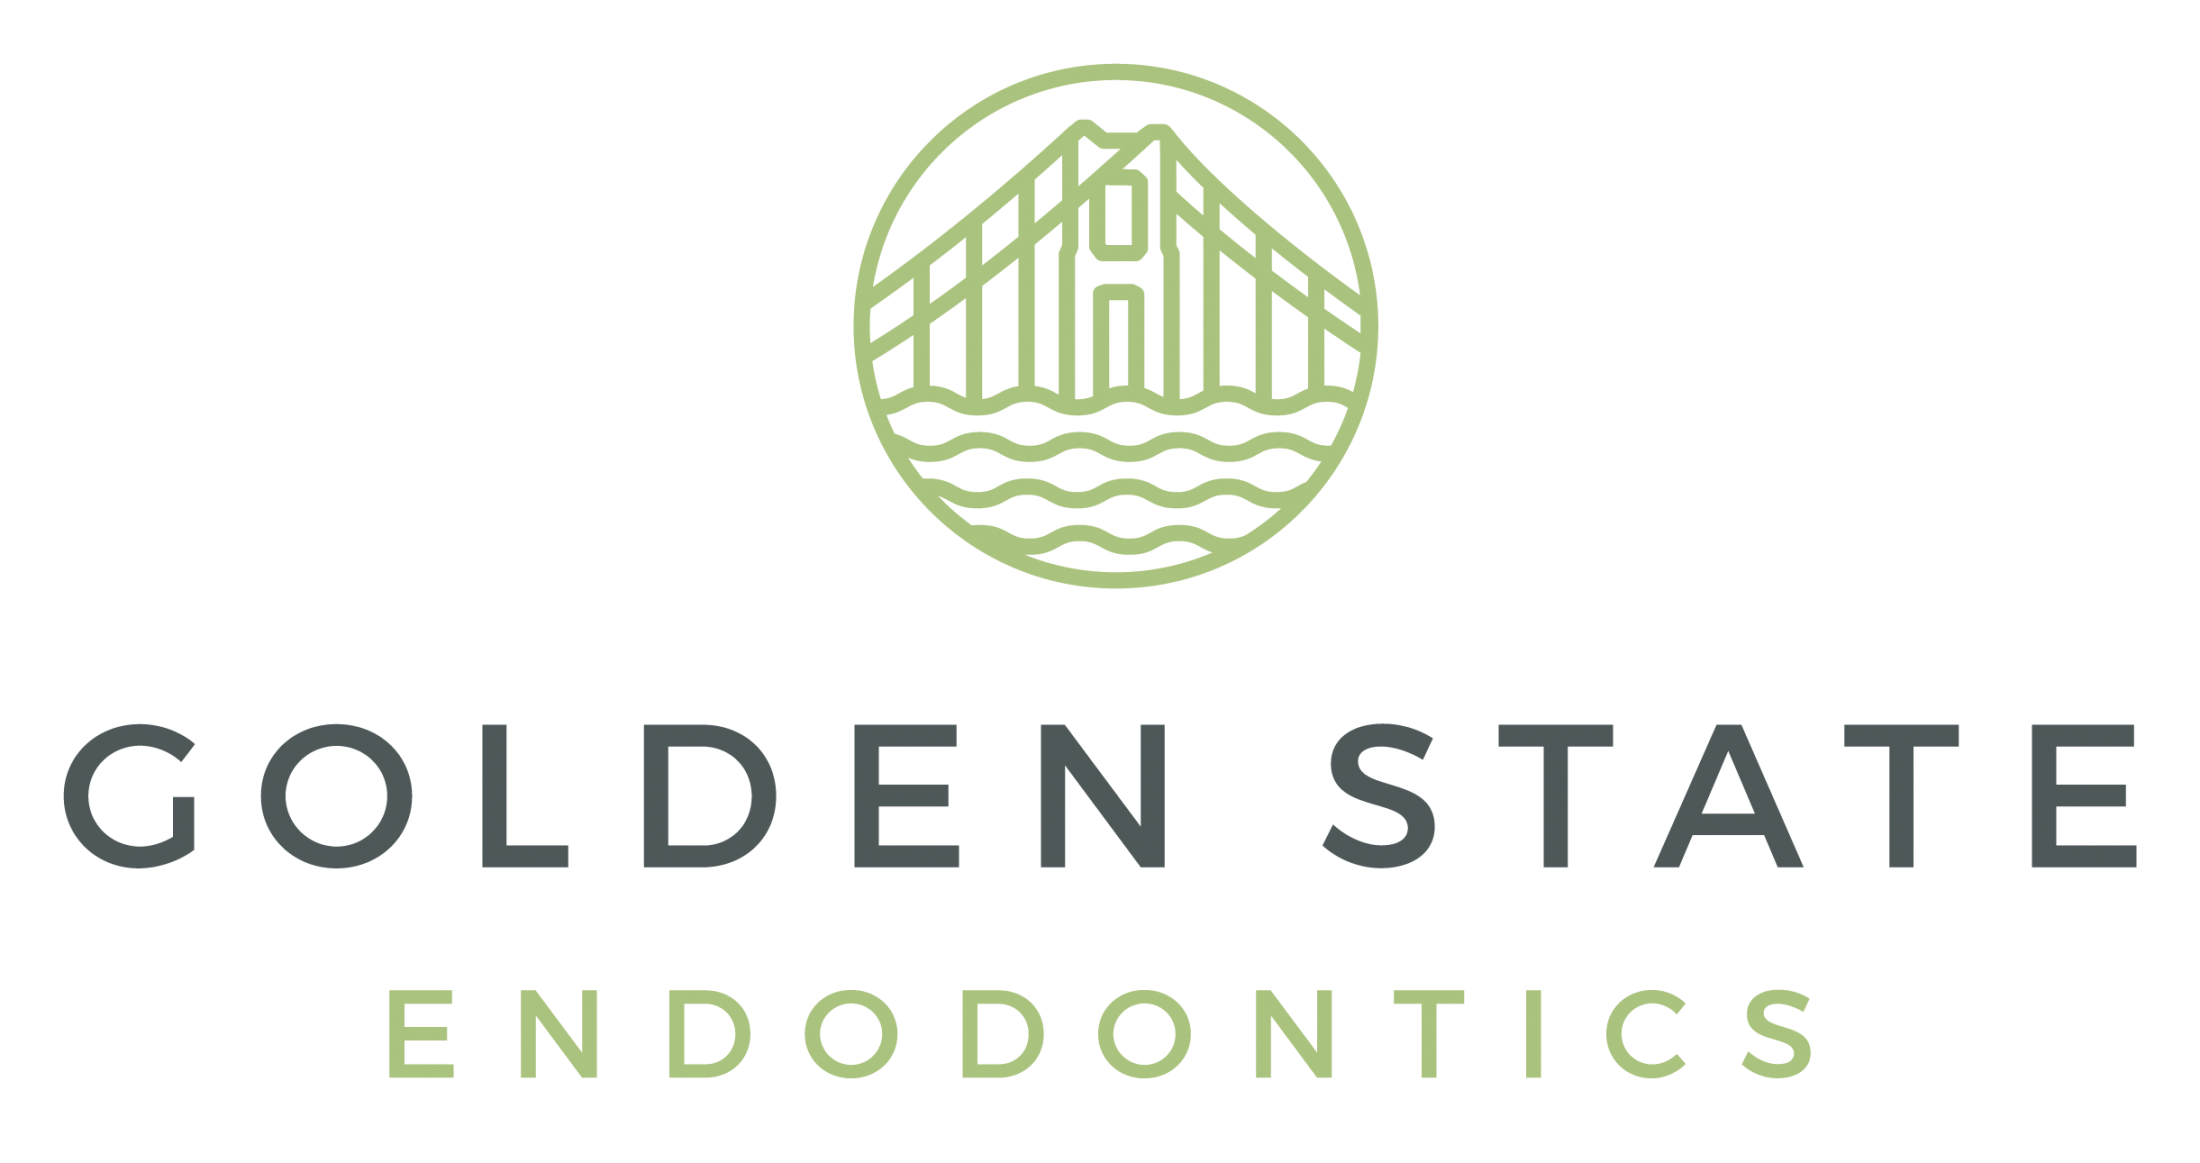 Link to Golden State Endodontics home page